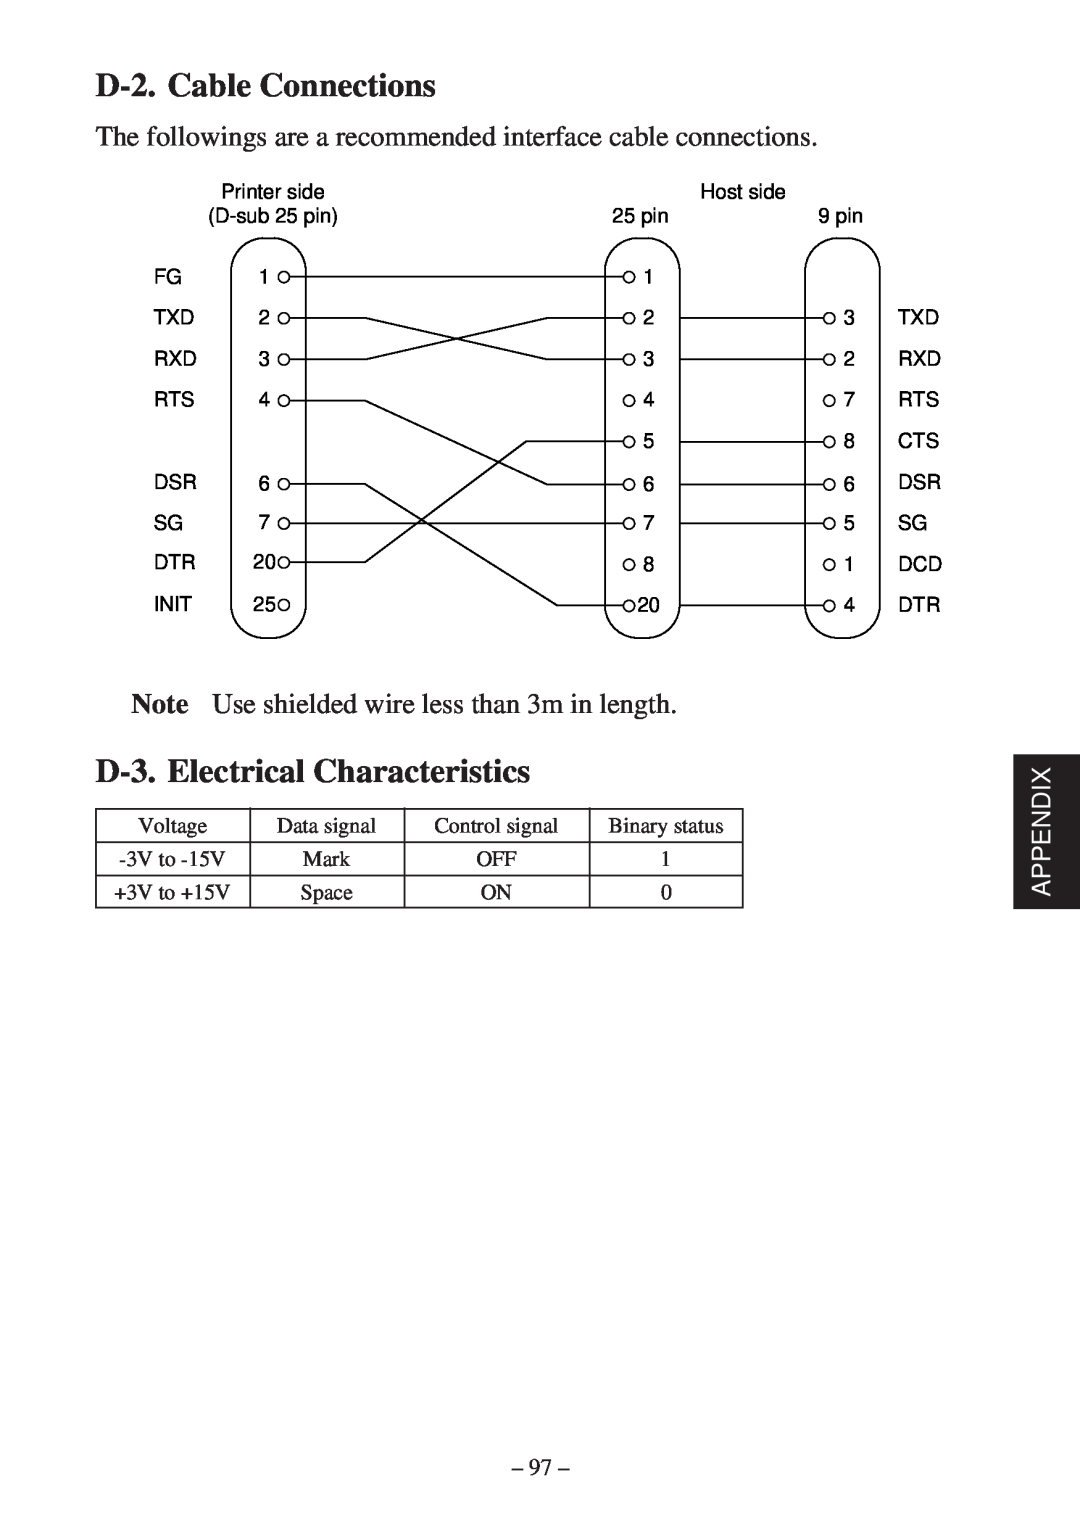 Star Micronics TSP2000 user manual D-2. Cable Connections, D-3. Electrical Characteristics, Appendix 